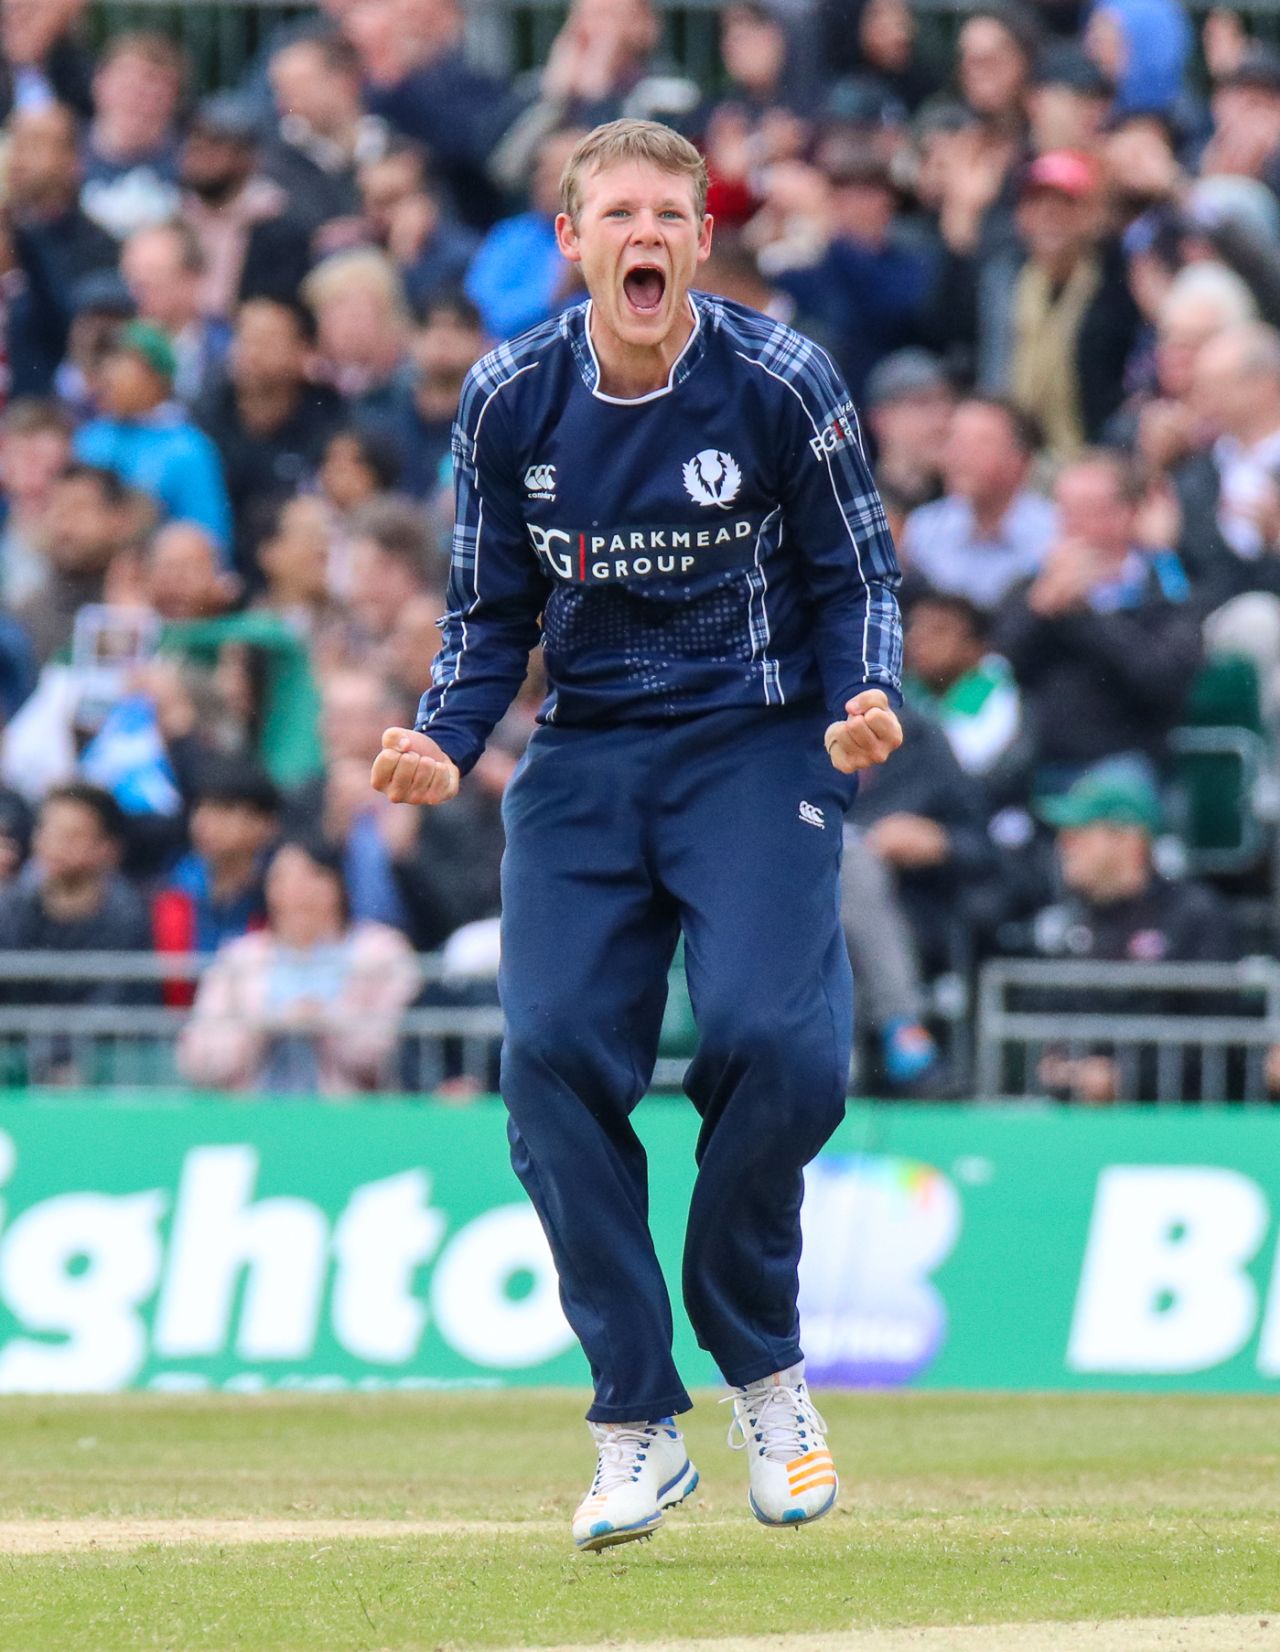 Michael Leask roars with delight after claiming another wicket, Scotland v Pakistan, 2nd T20I, Edinburgh, June 13, 2018